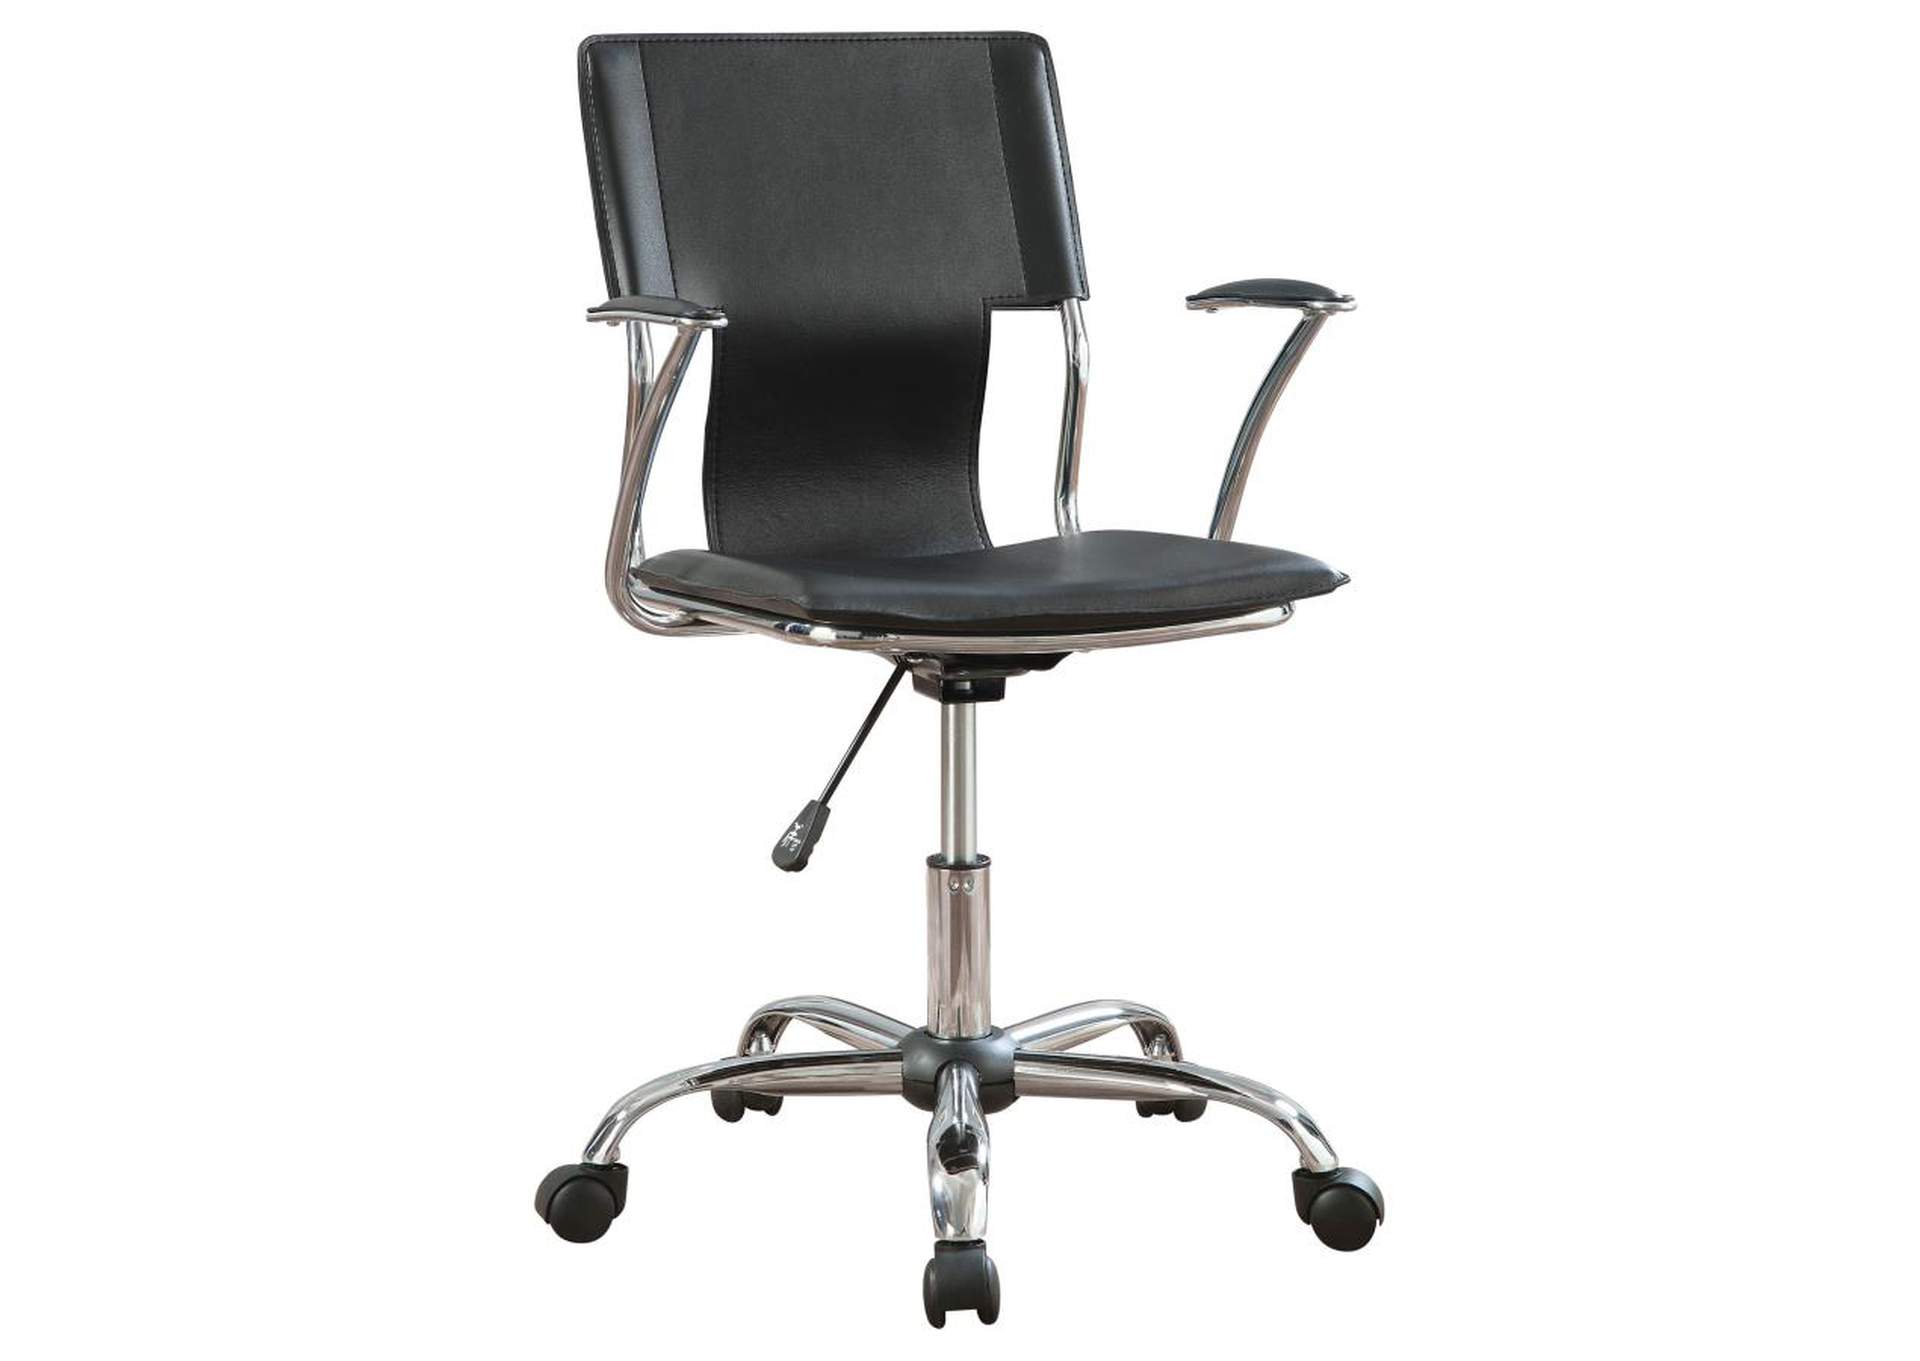 Adjustable Height Office Chair Black and Chrome,Coaster Furniture